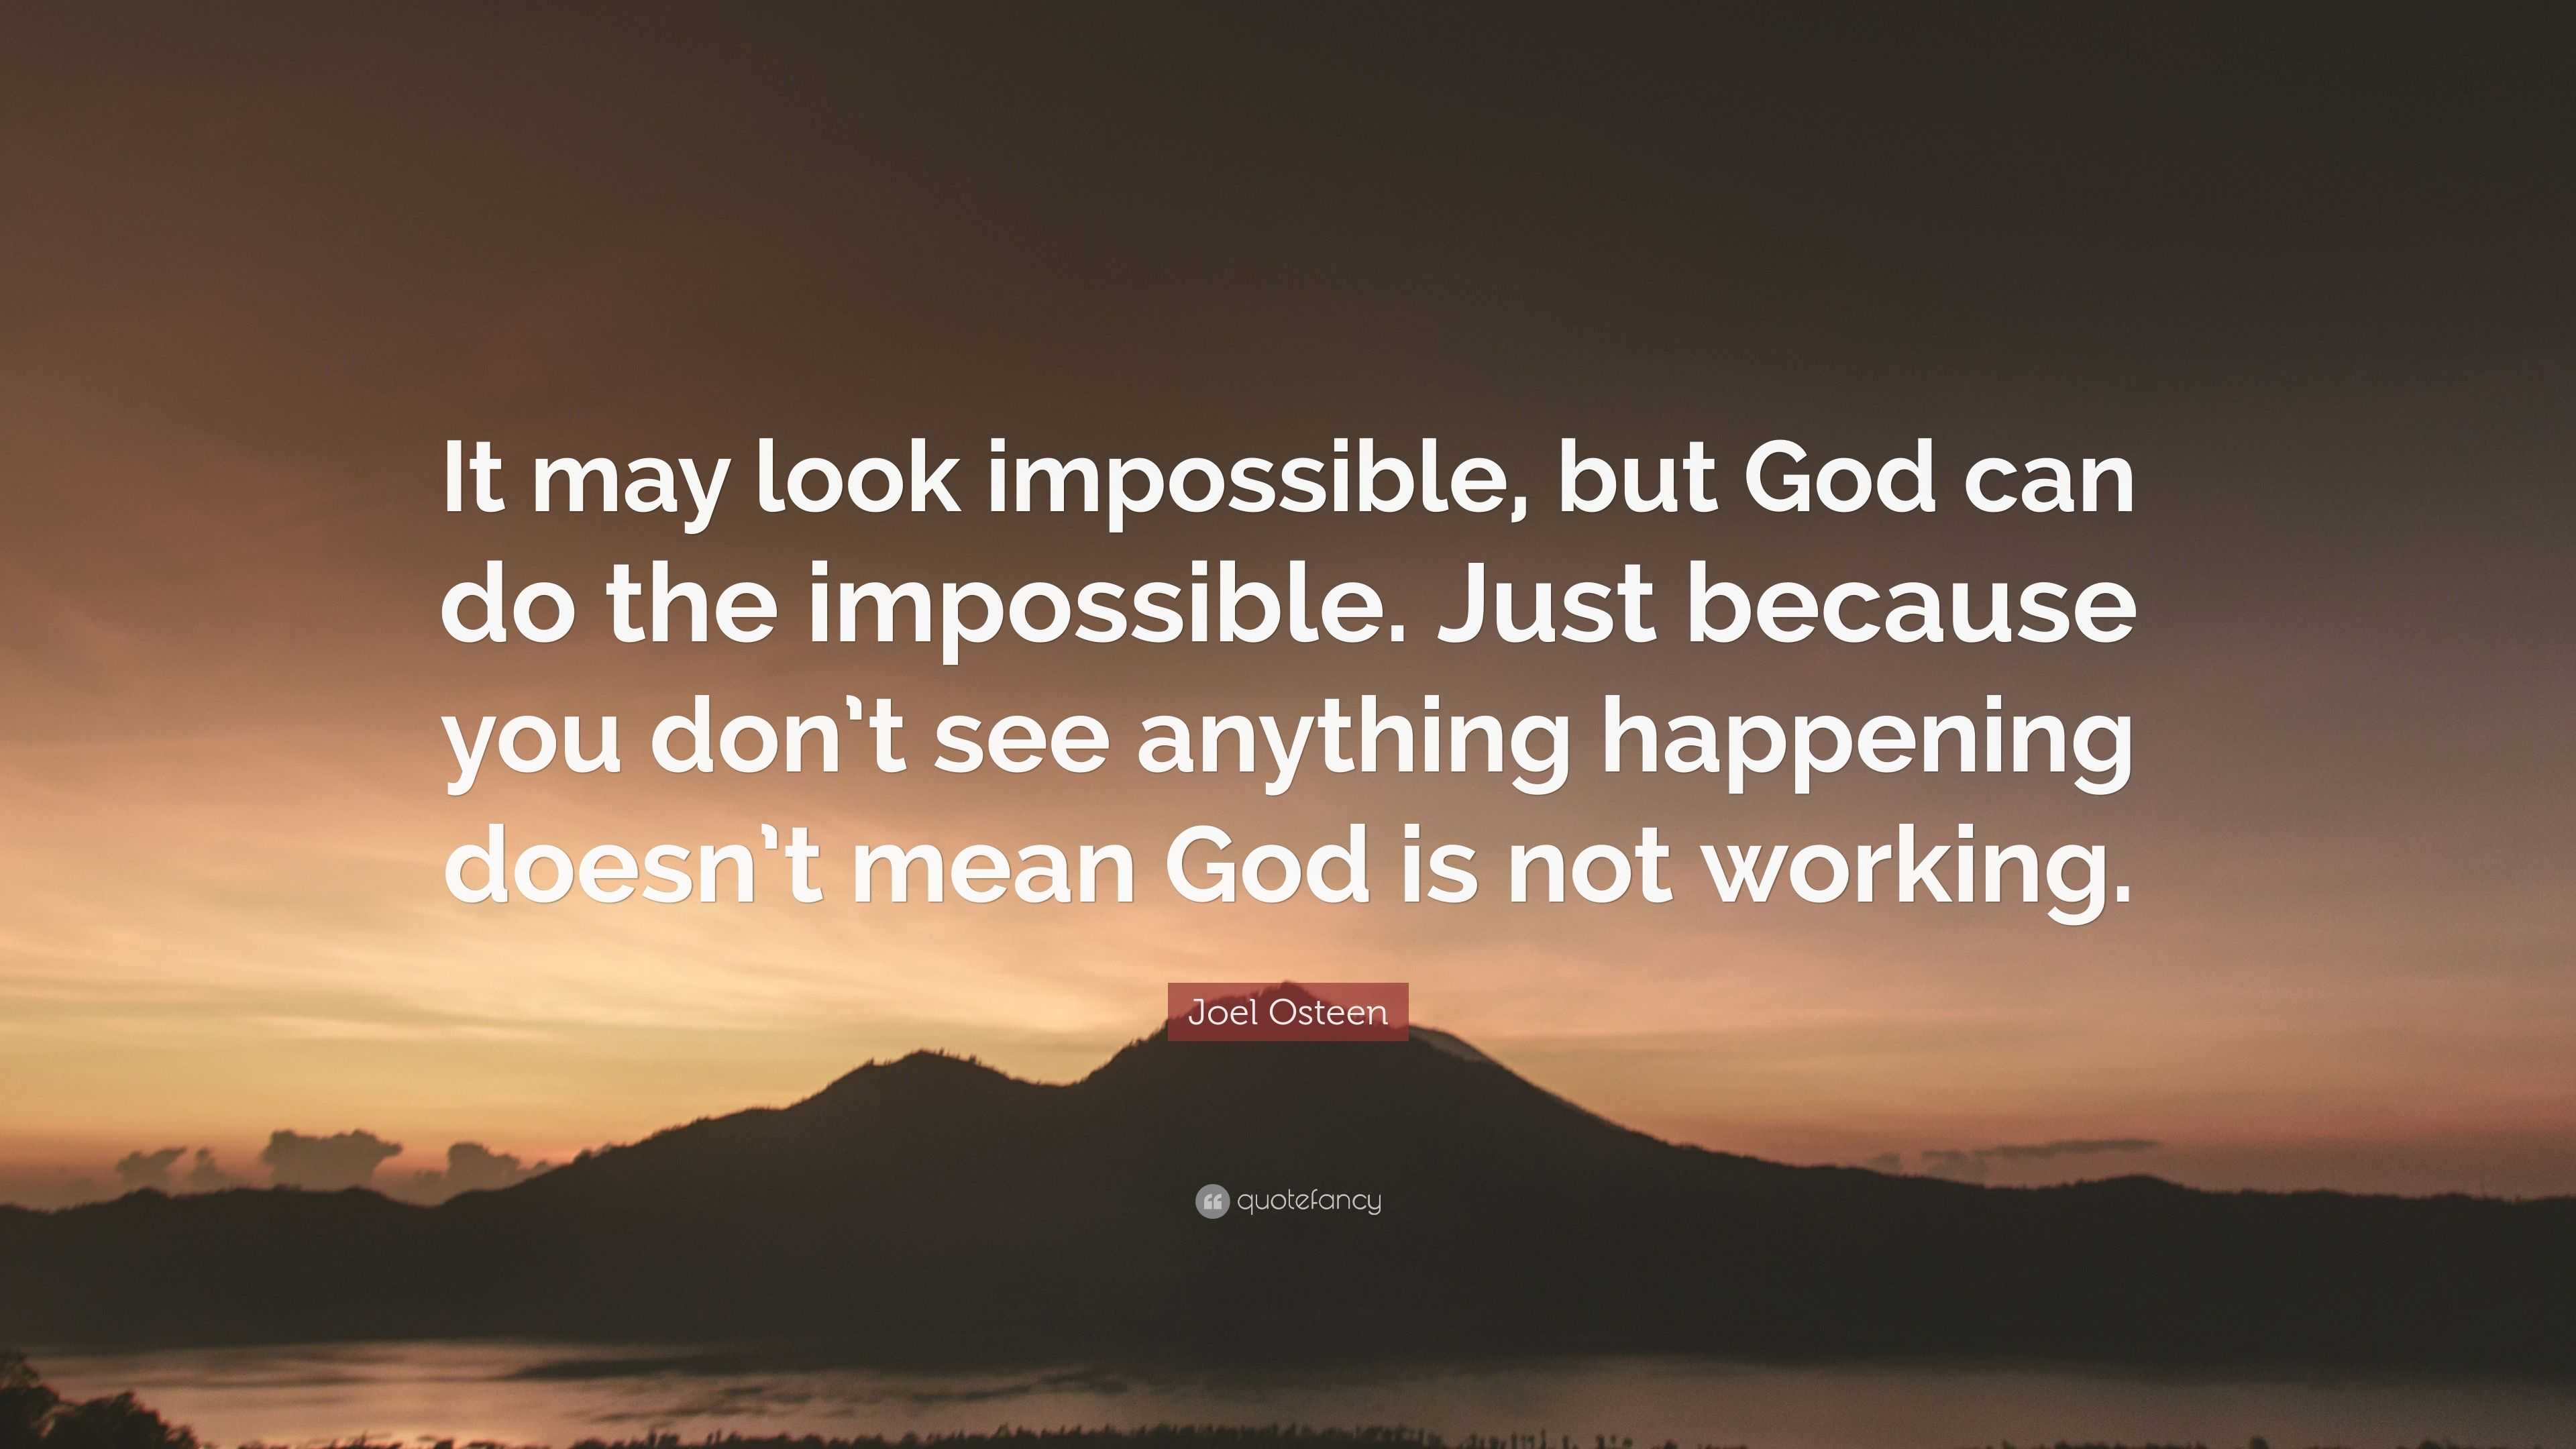 Joel Osteen Quote: “It may look impossible, but God can do the ...